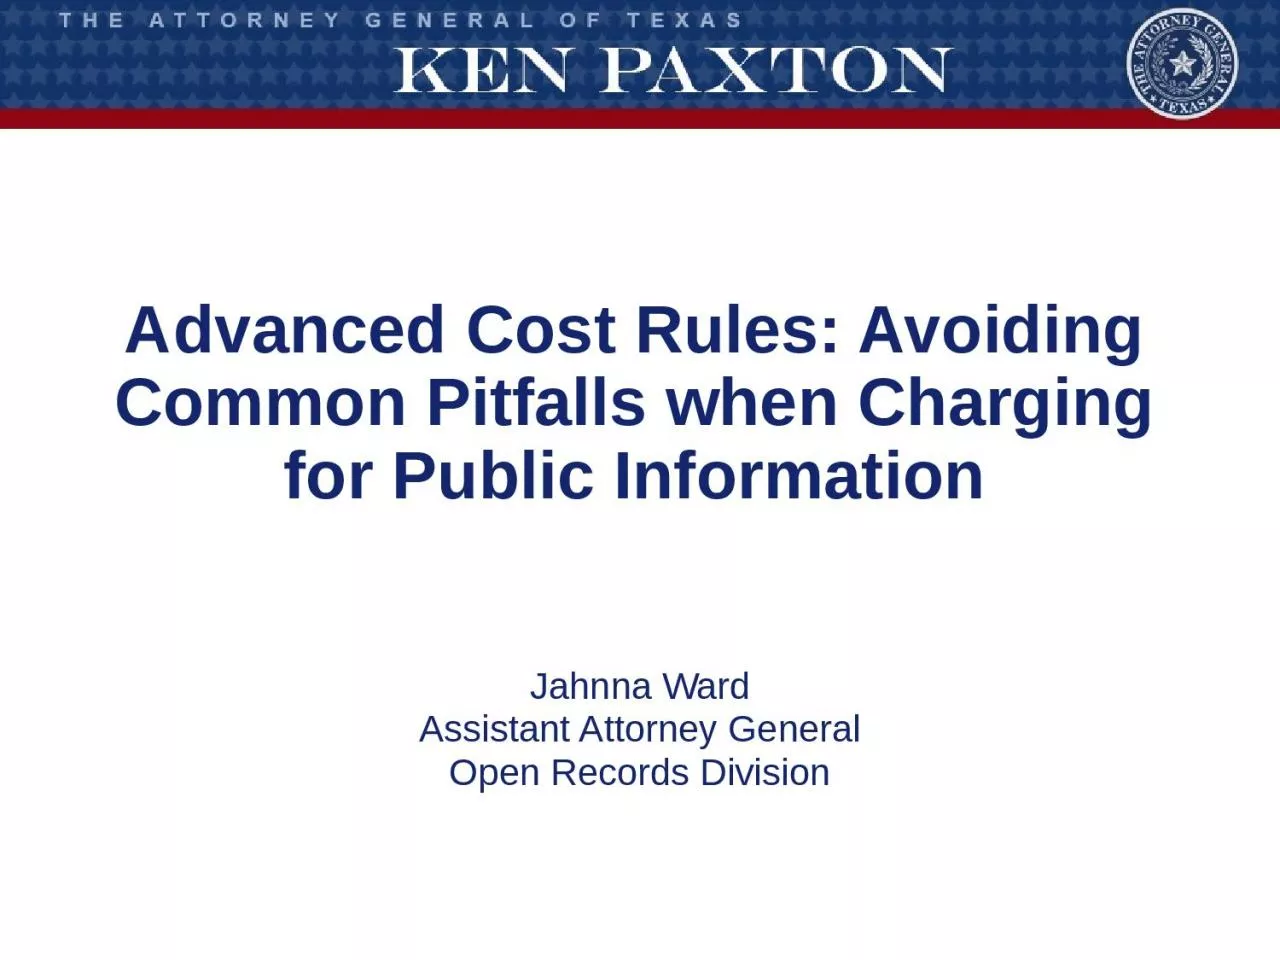 Advanced Cost Rules: Avoiding Common Pitfalls when Charging for Public Information